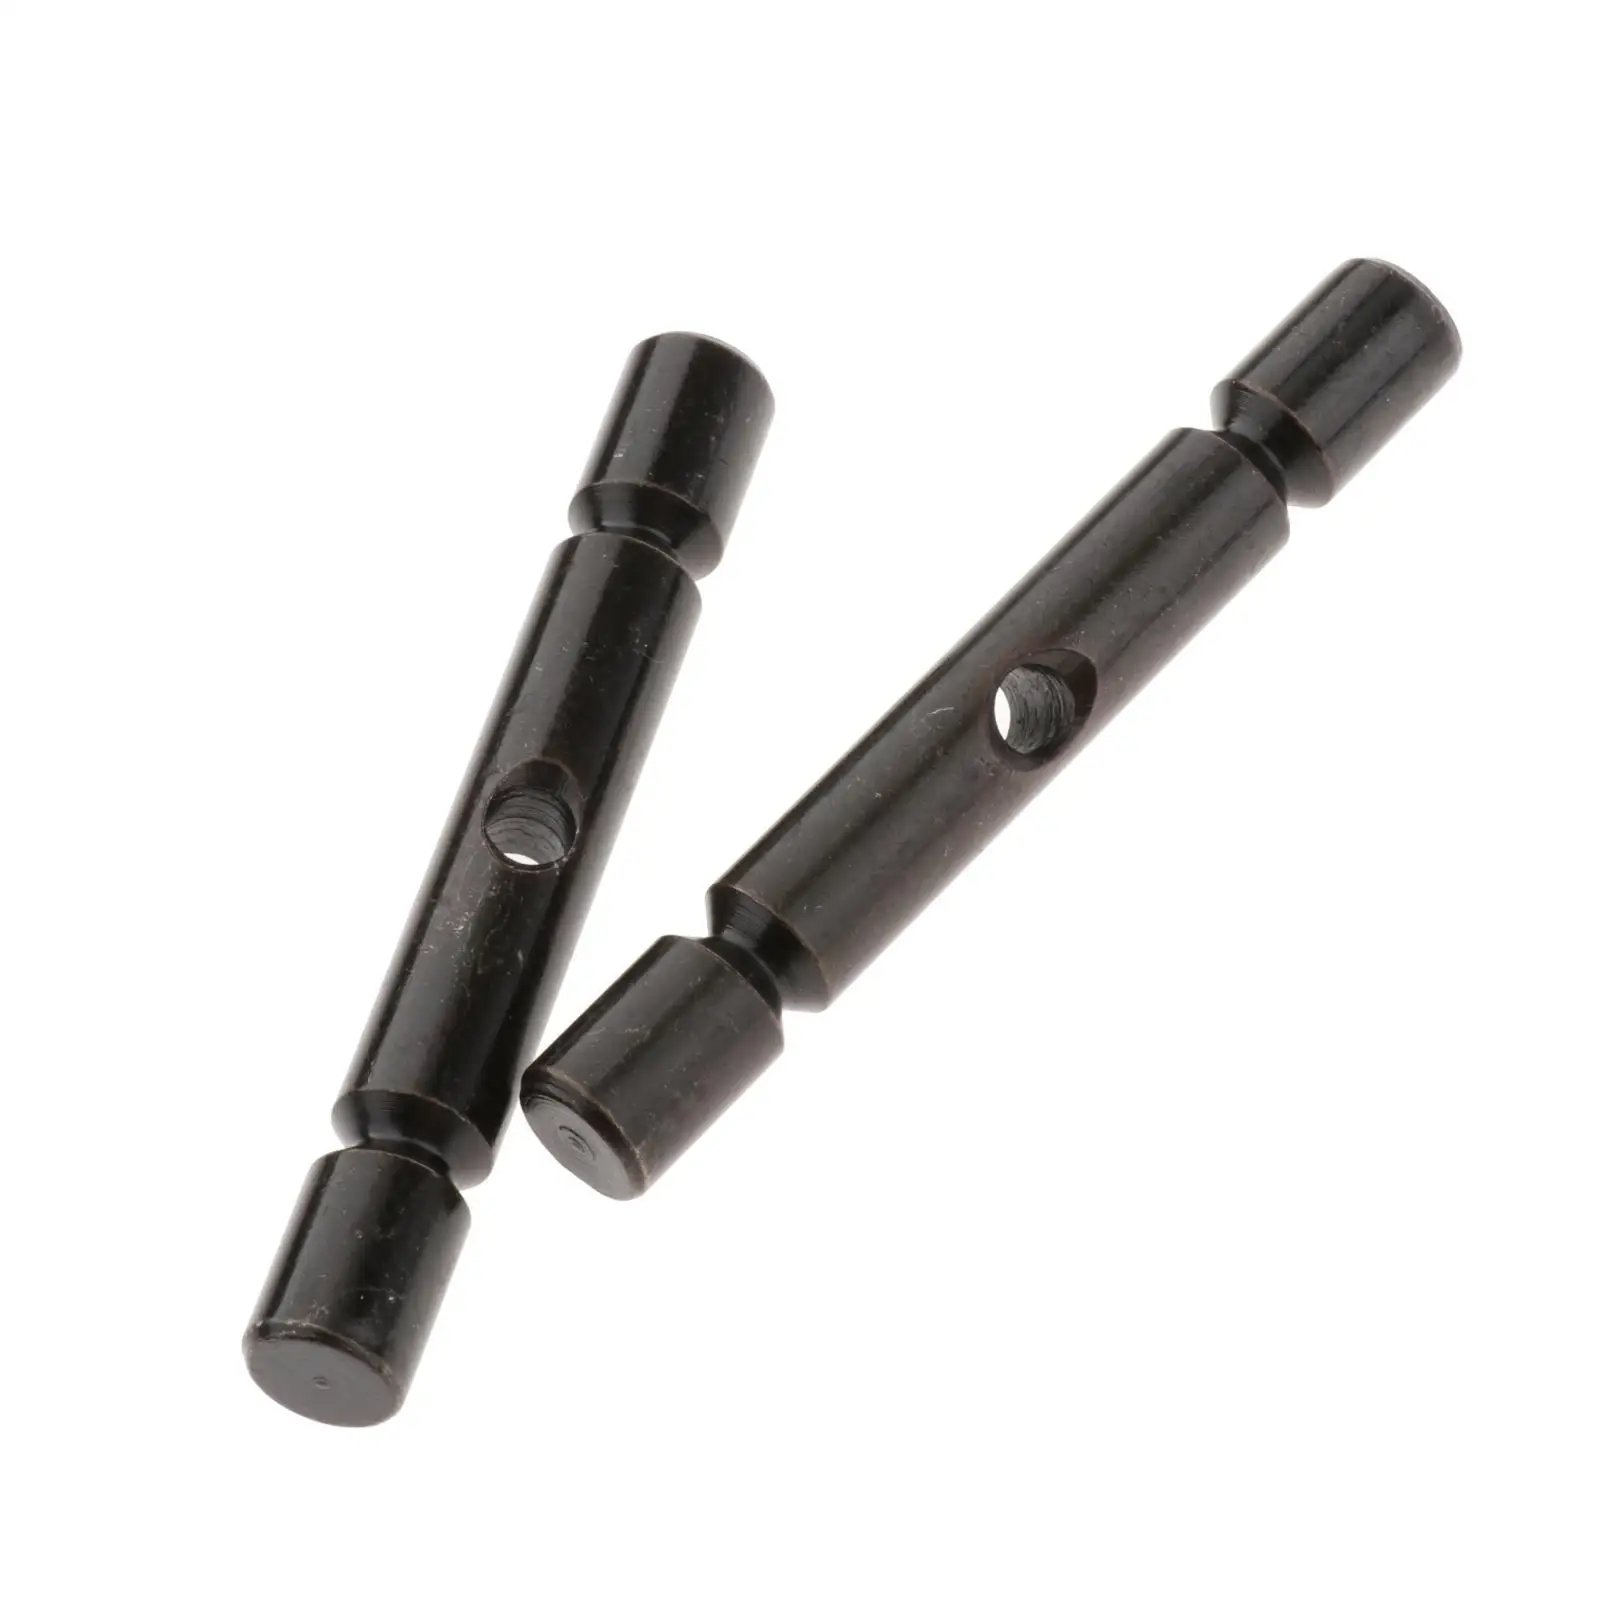 2 Pieces Black Steel Shear Pin 2205063 for Sportsman ATV Durable